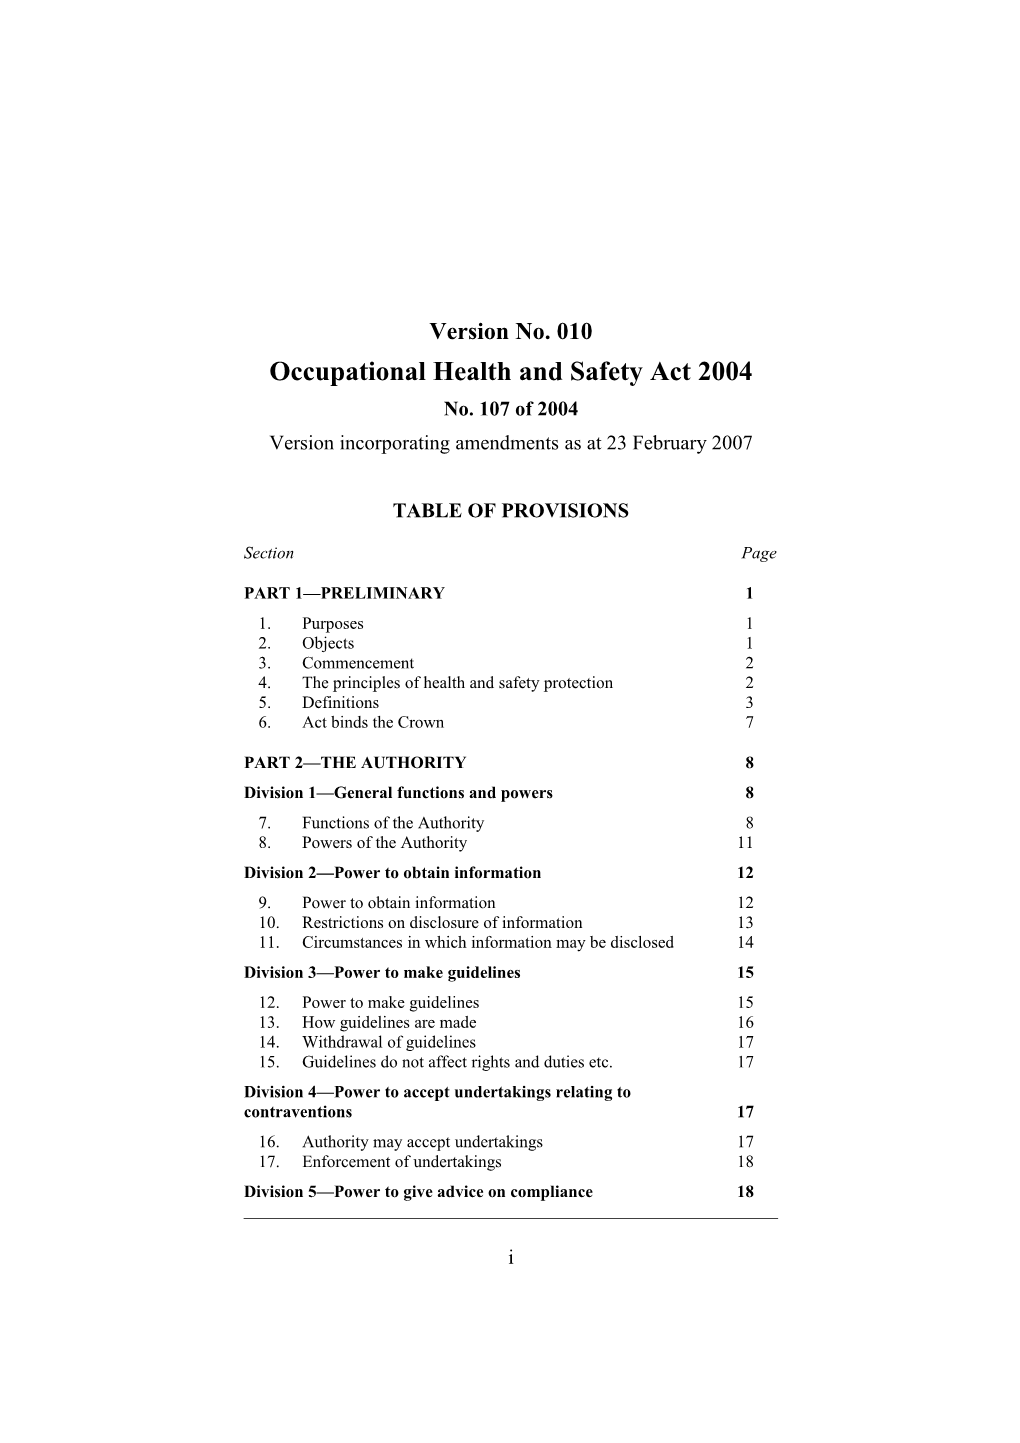 Occupational Health and Safety Act 2004